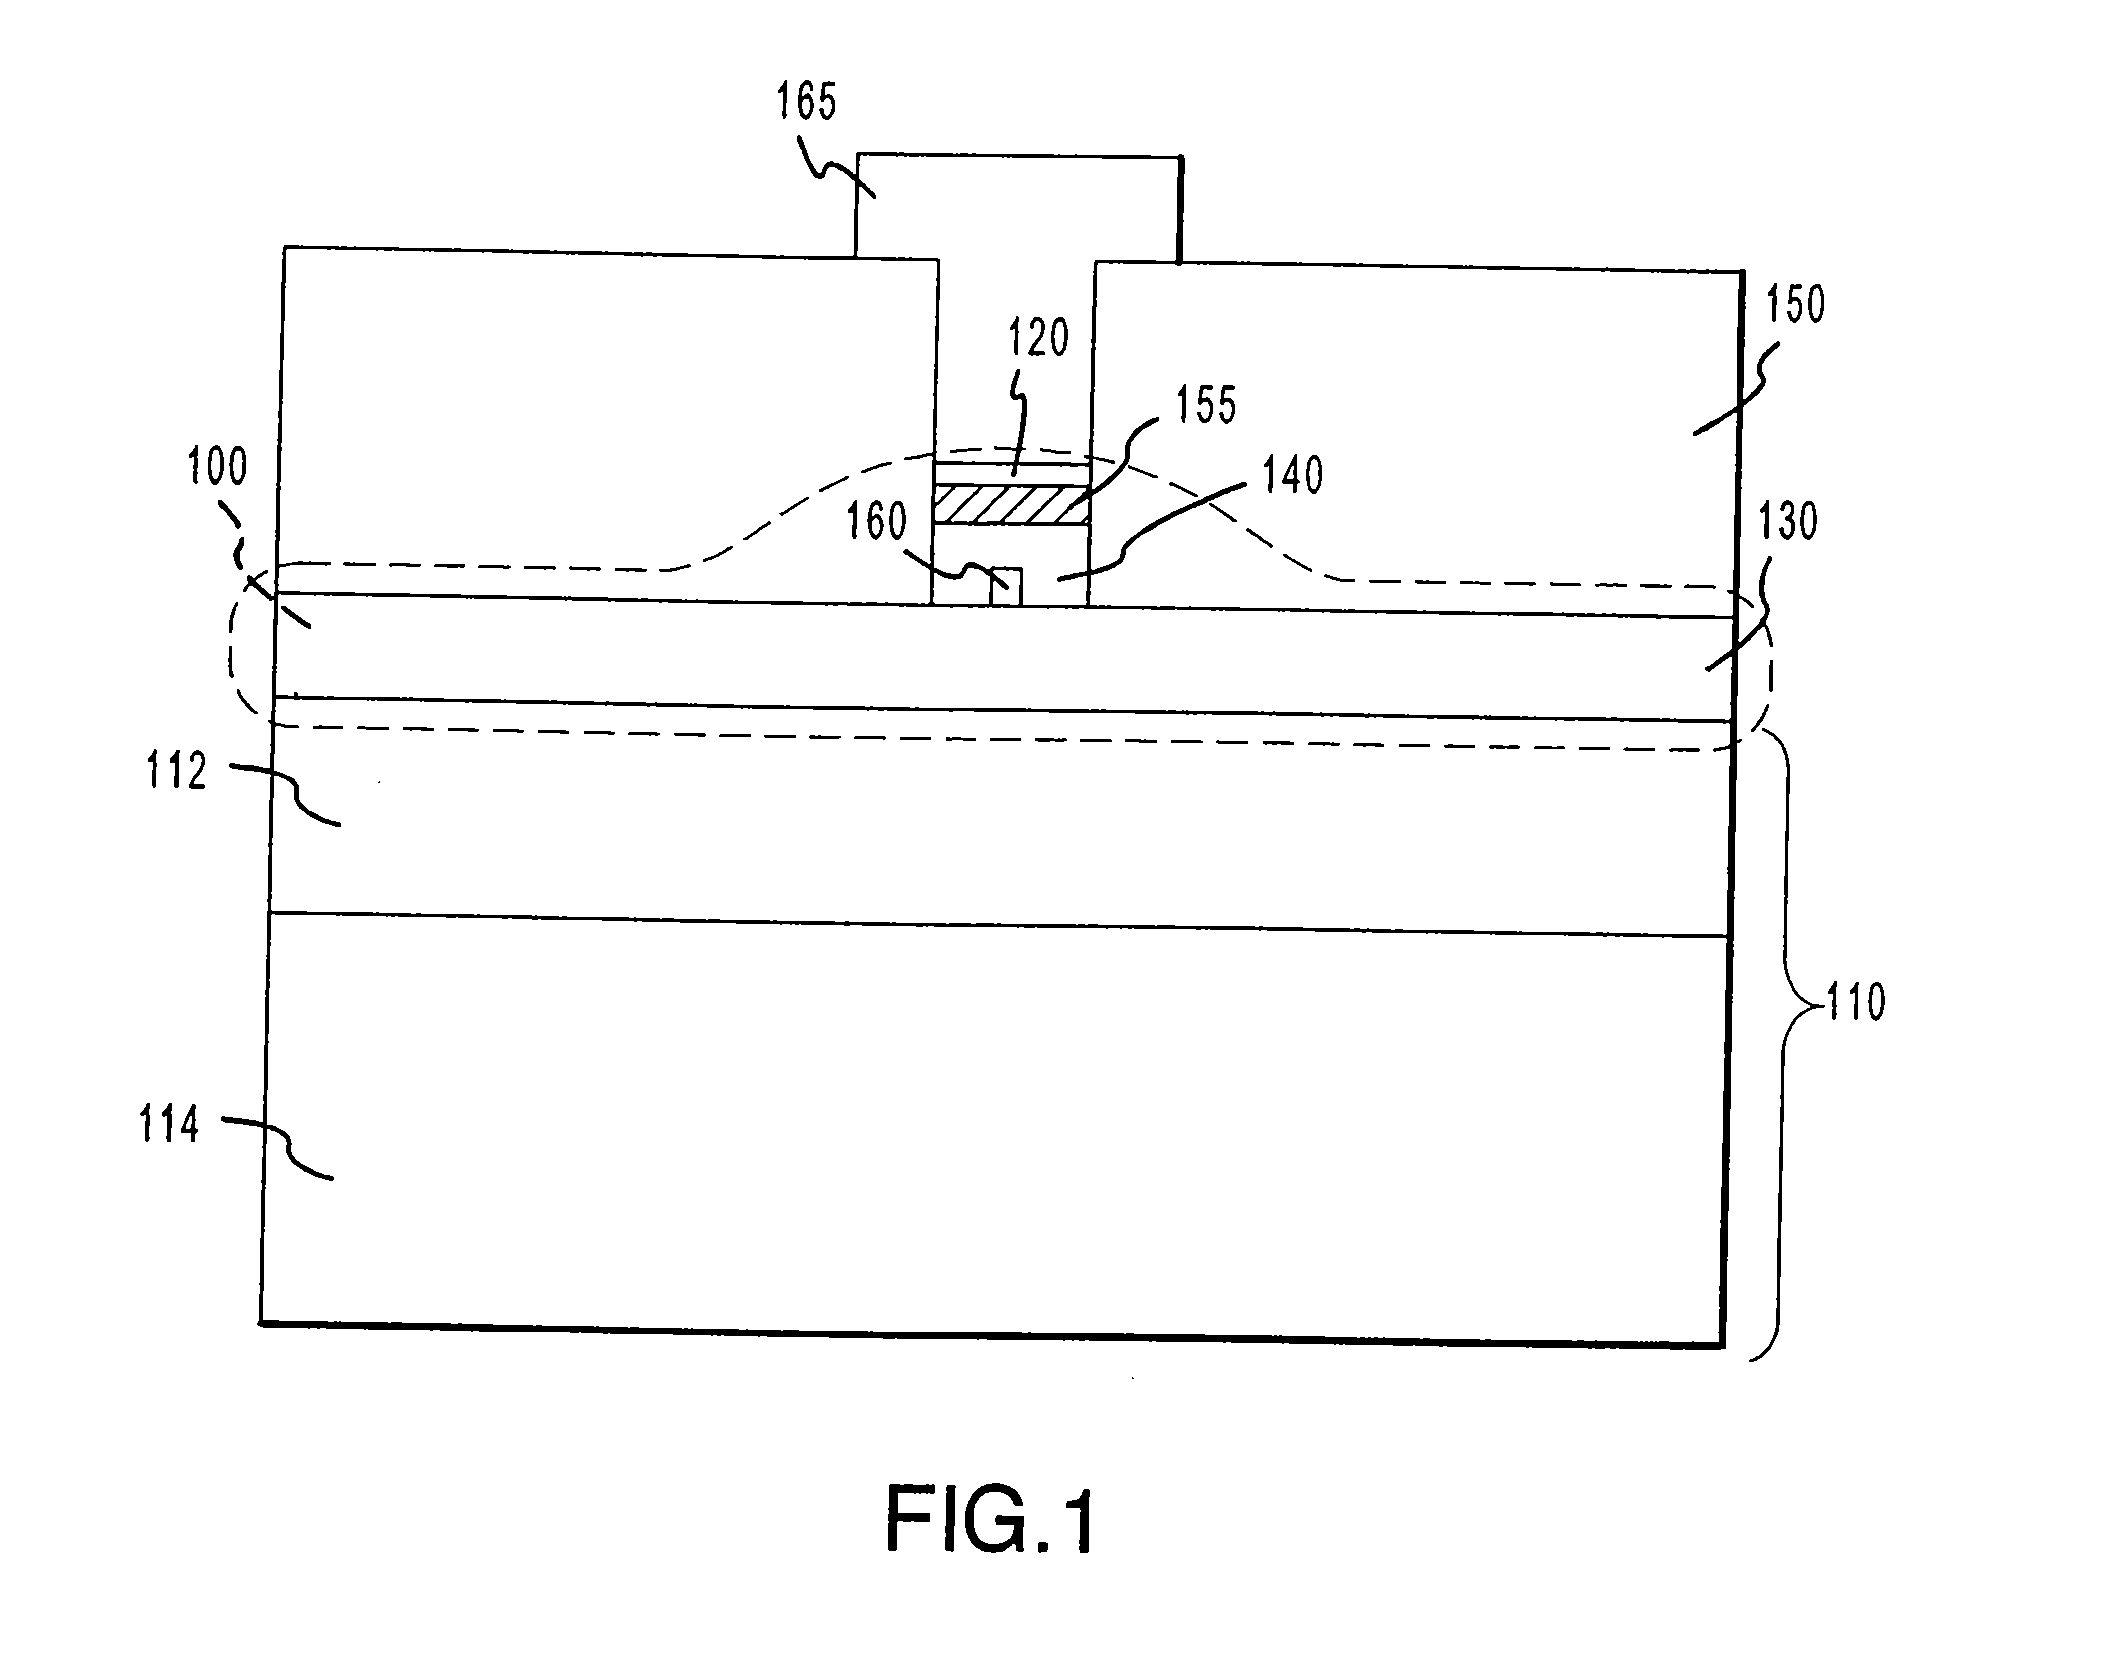 Microelectronic programmable device and methods of forming and programming the same